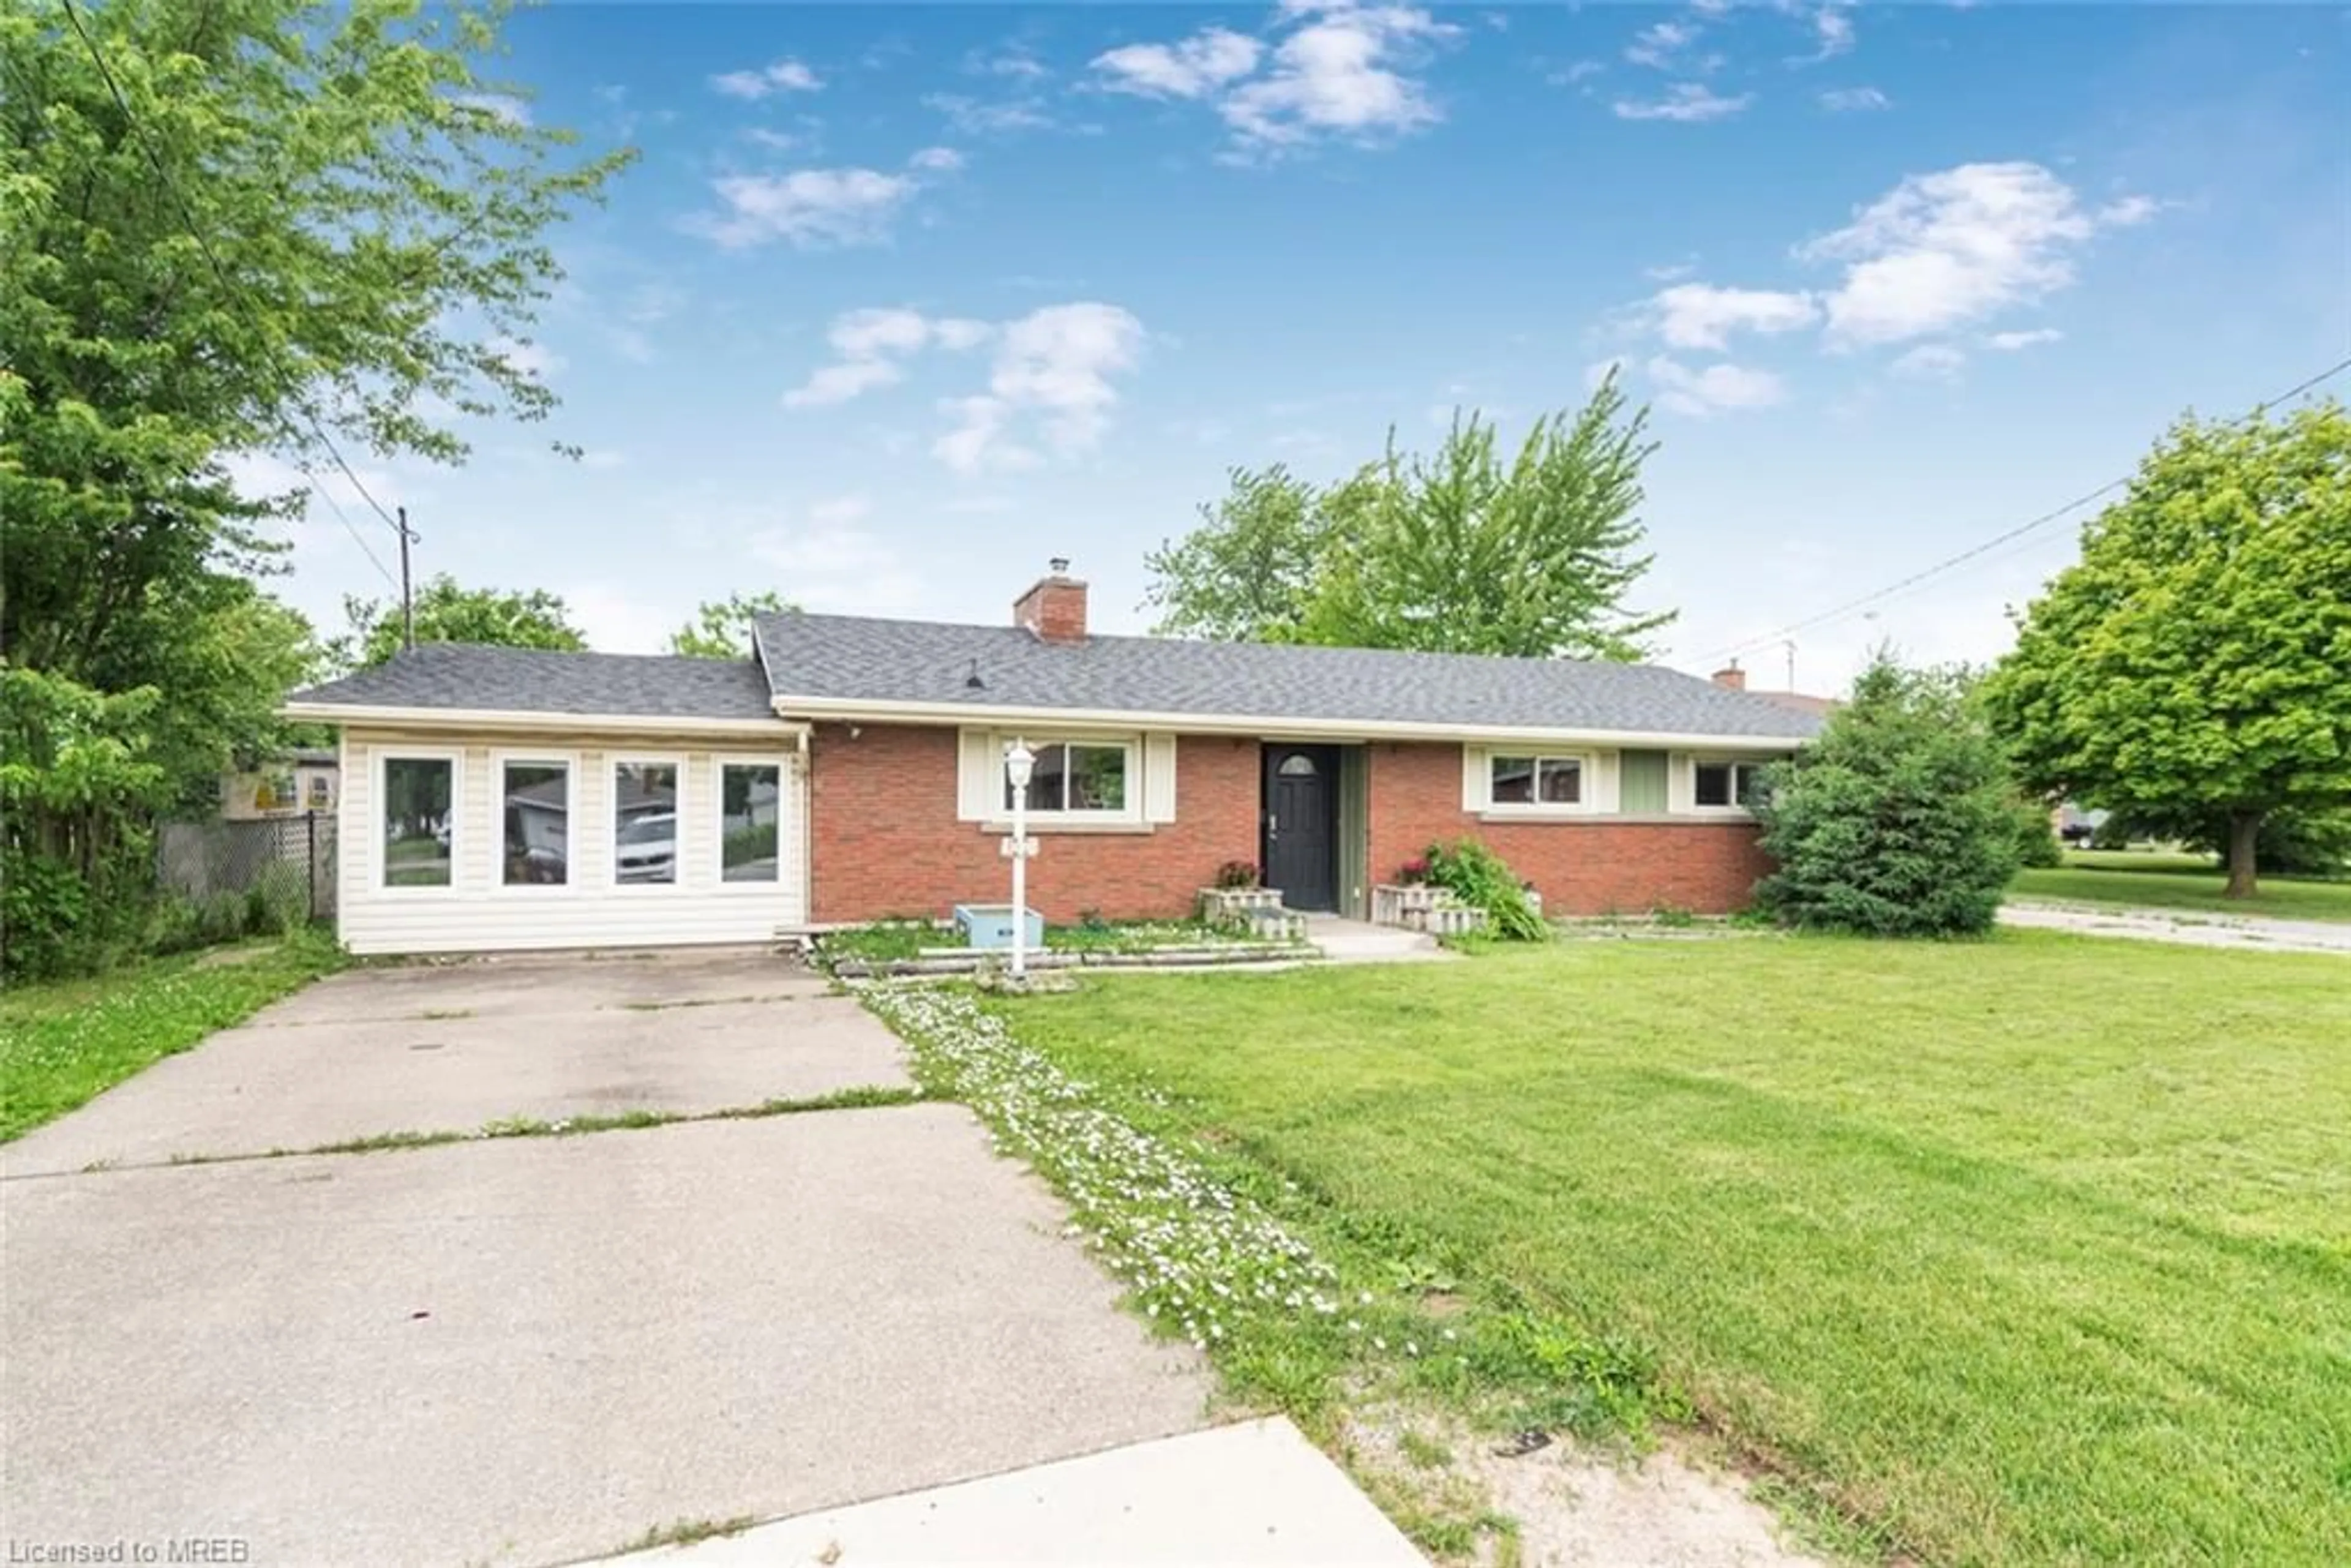 Home with brick exterior material for 142 St Davids Rd Rd, St. Catharines Ontario L2T 1R1